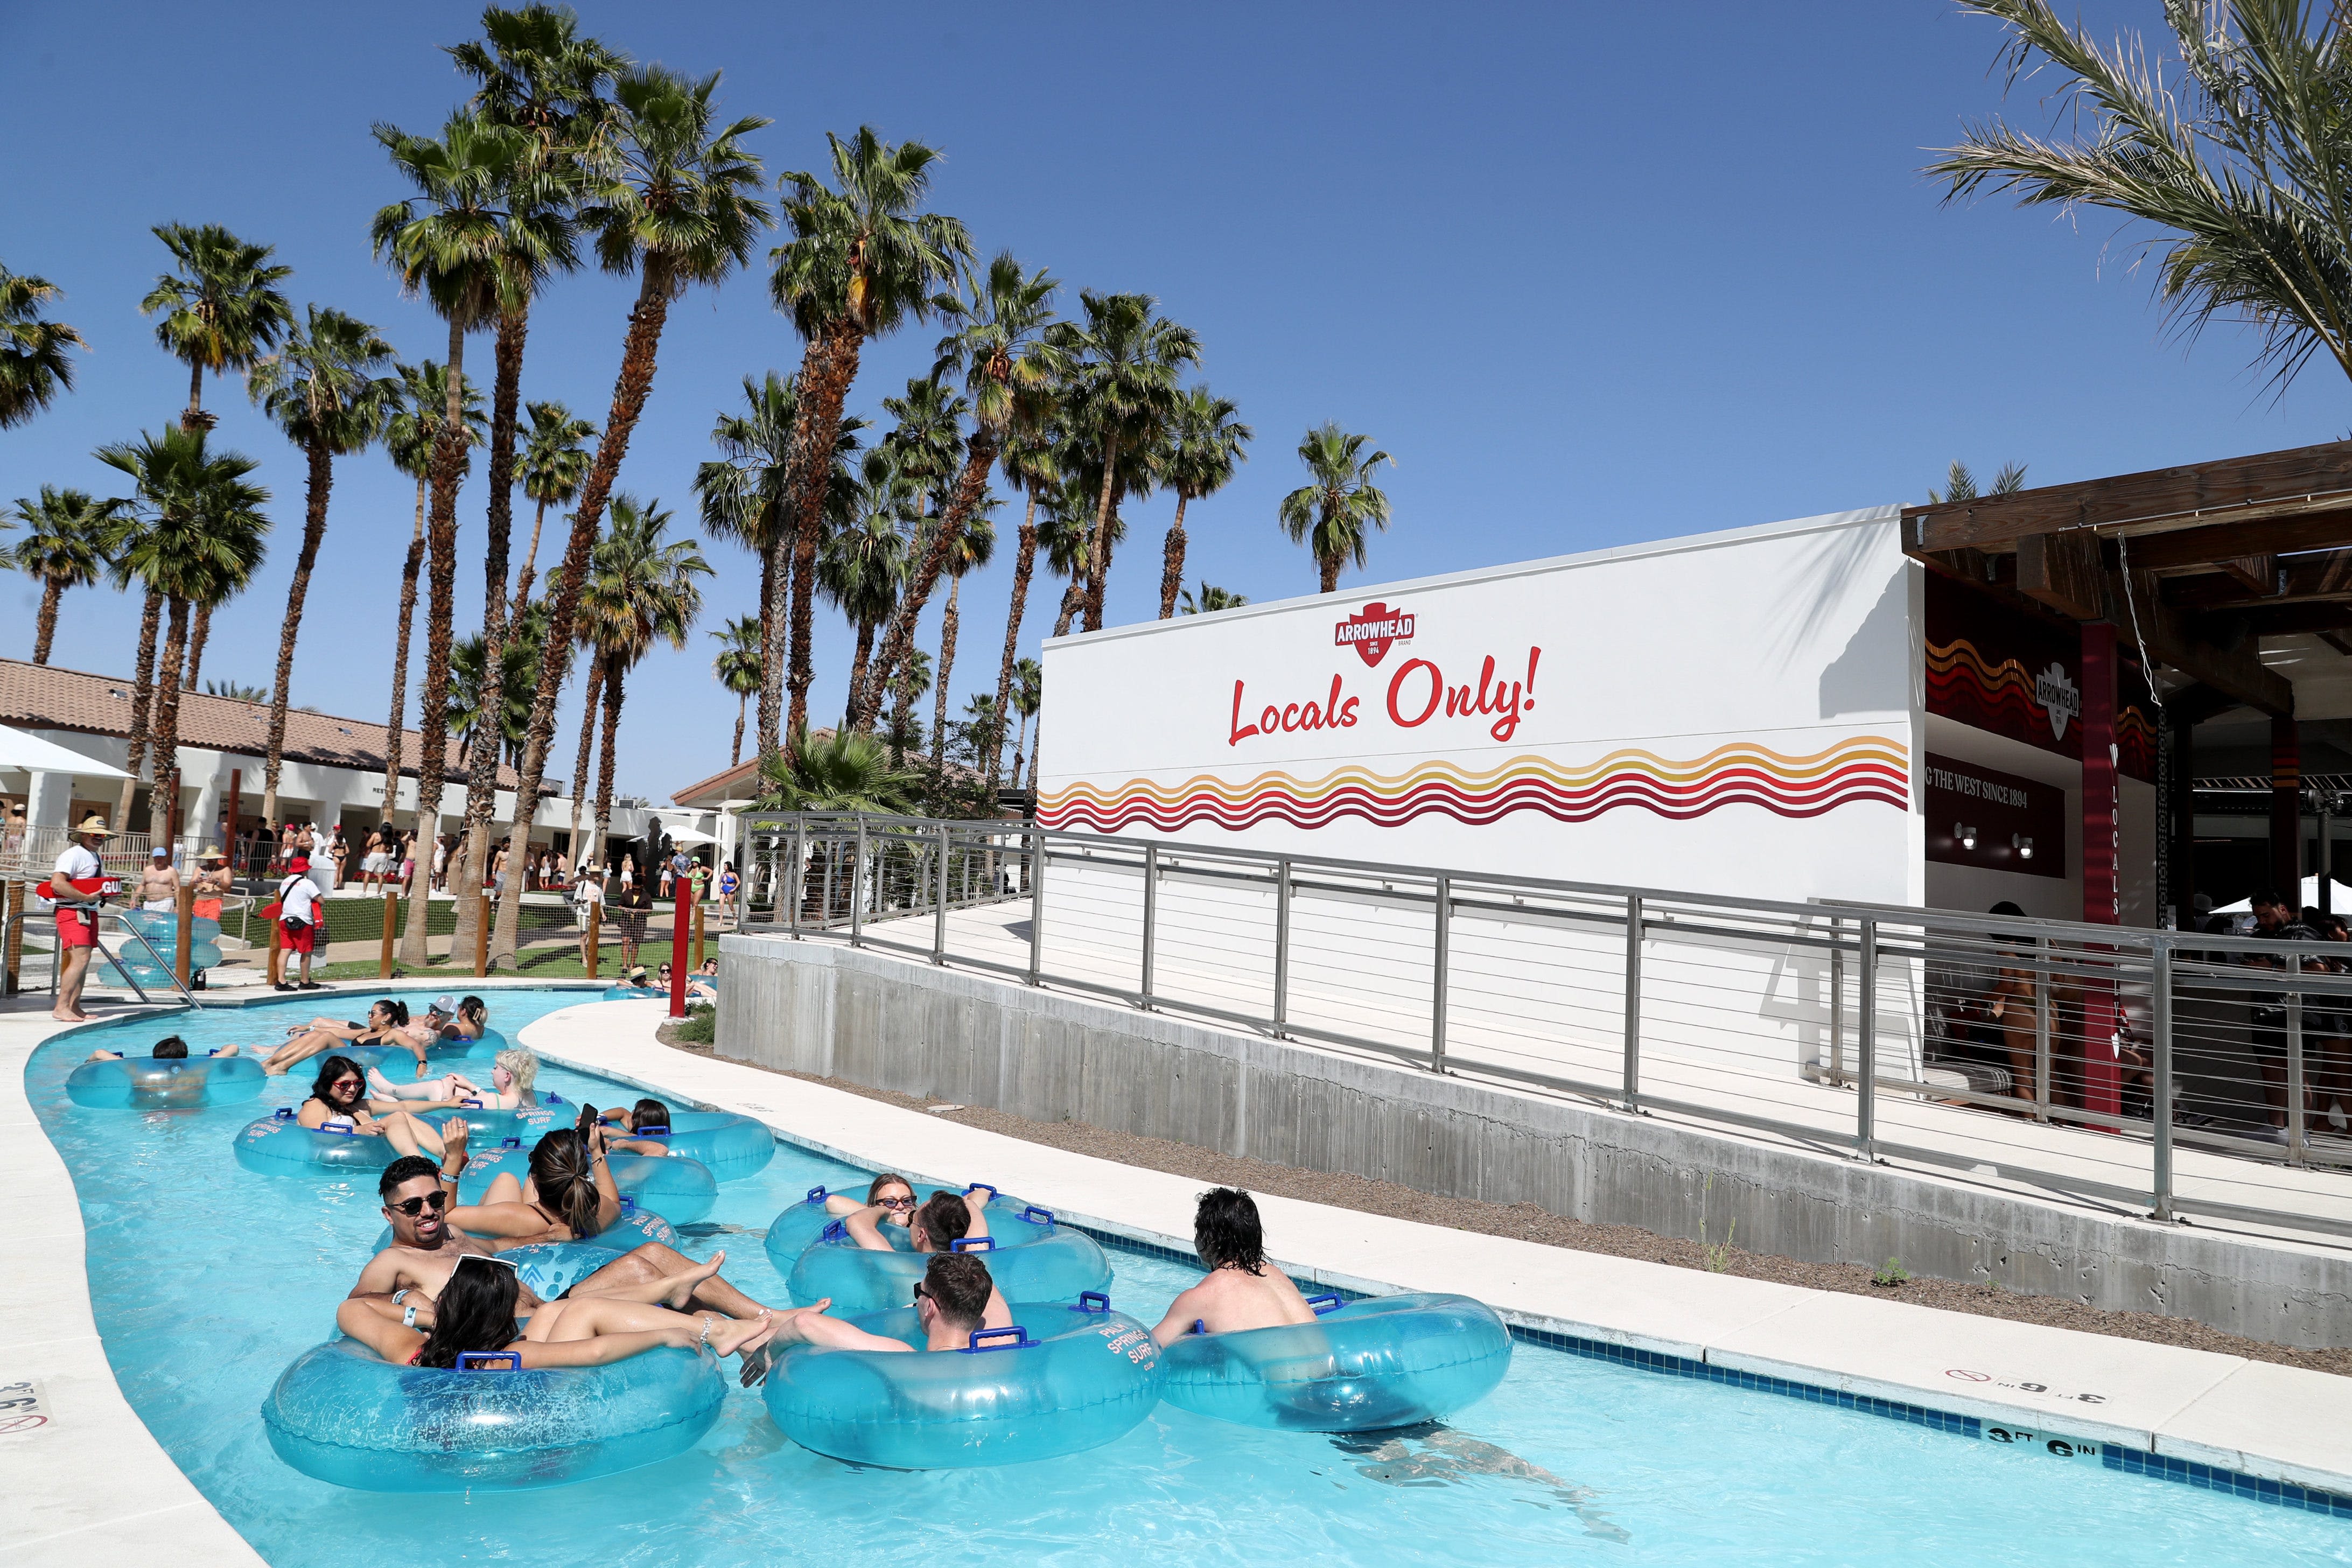 From a pool party to beer fest, here's 10 things to do in the Coachella Valley this week